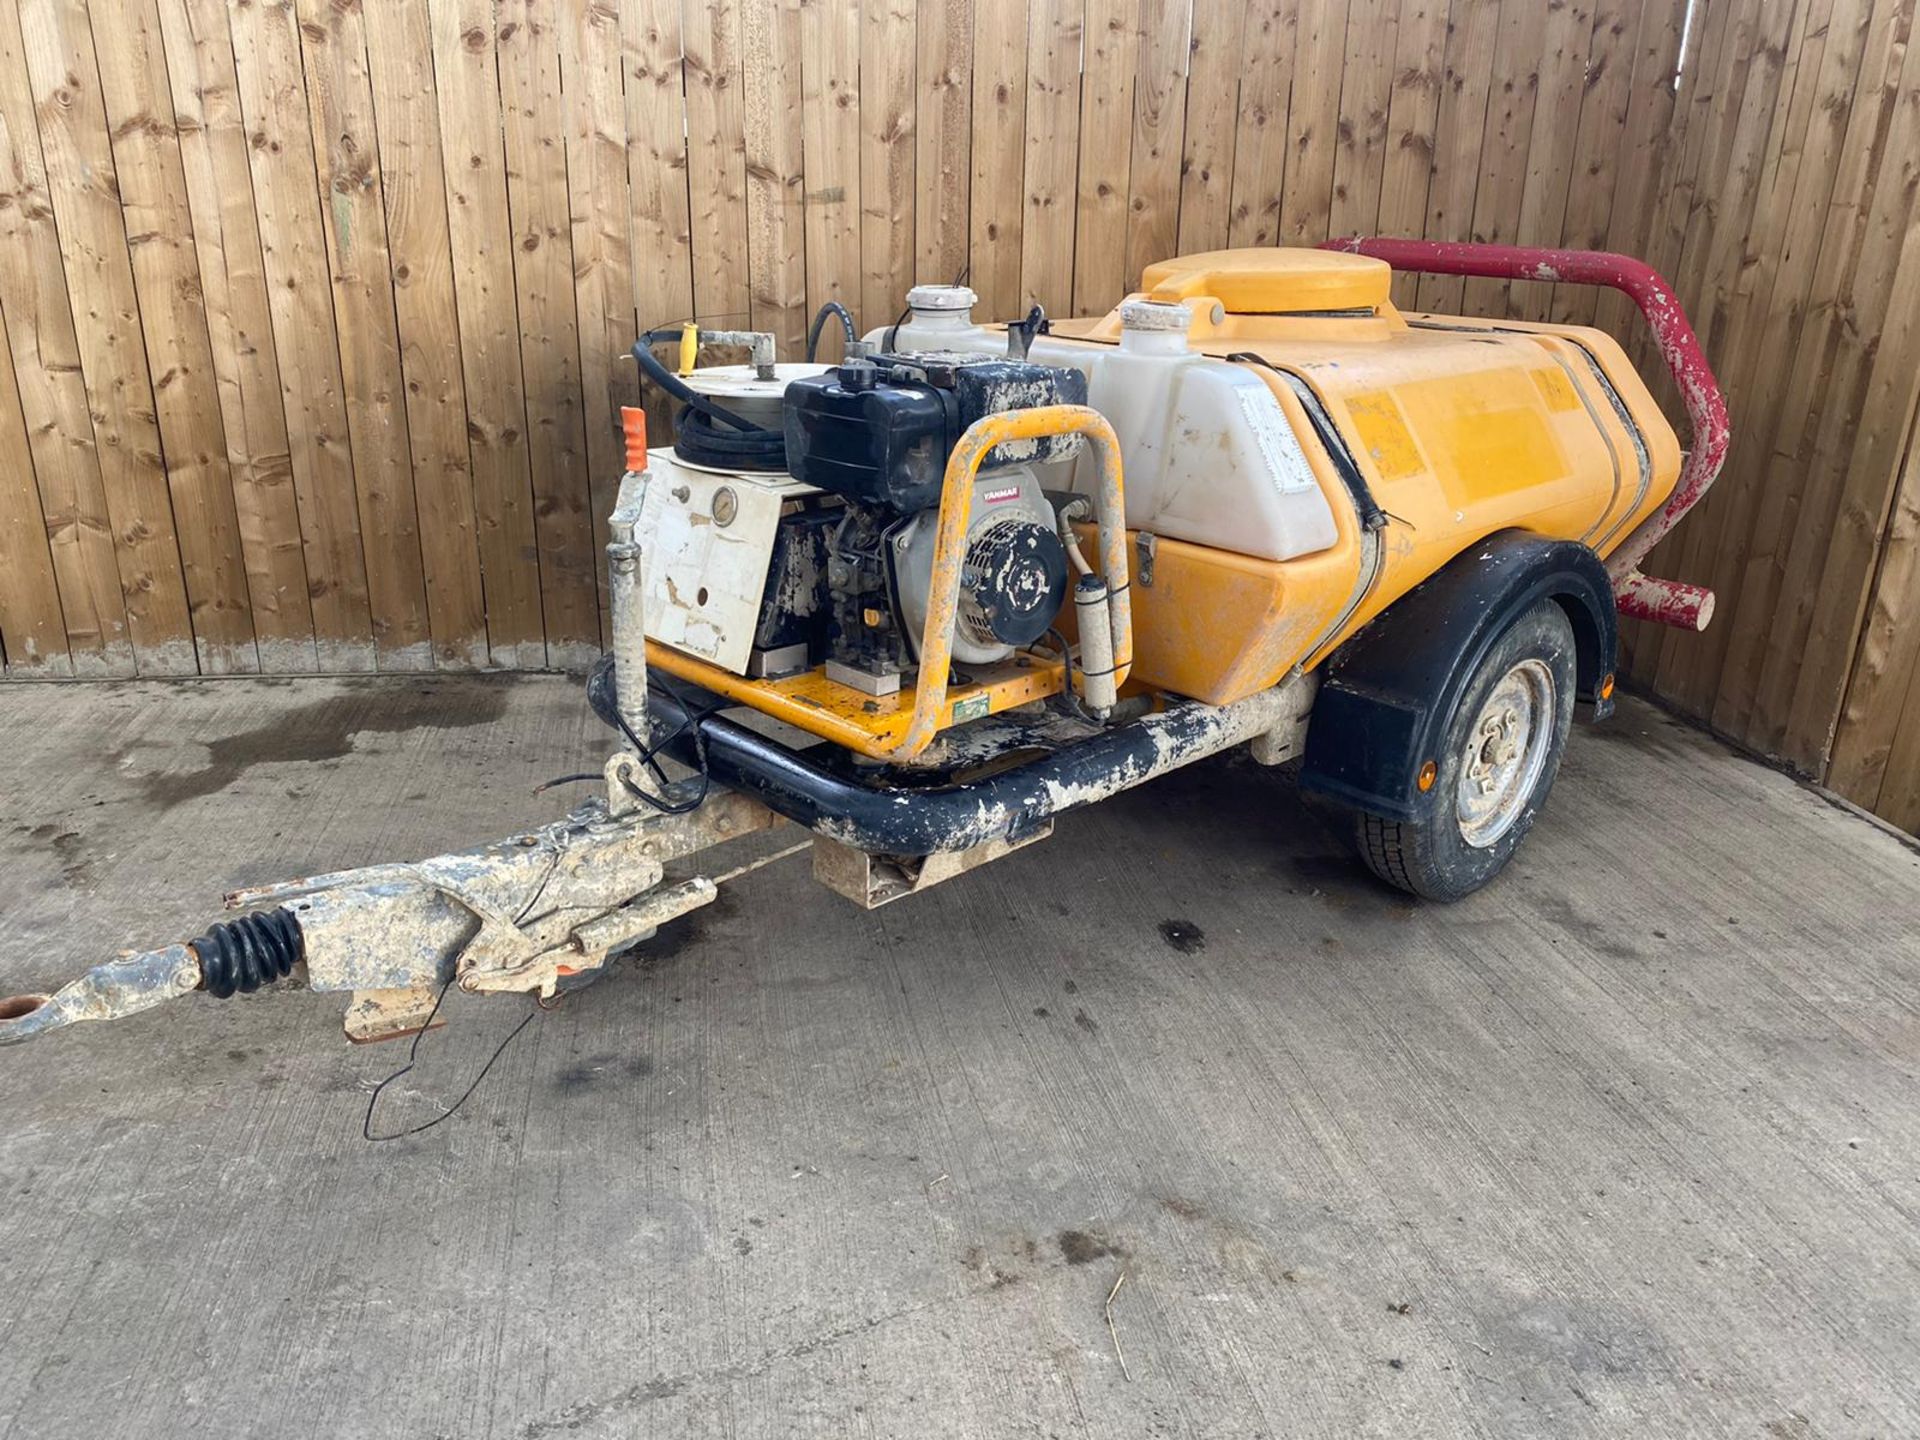 YANMAR TOWABLE DIESEL WASHER LOCATION NORTH YORKSHIRE